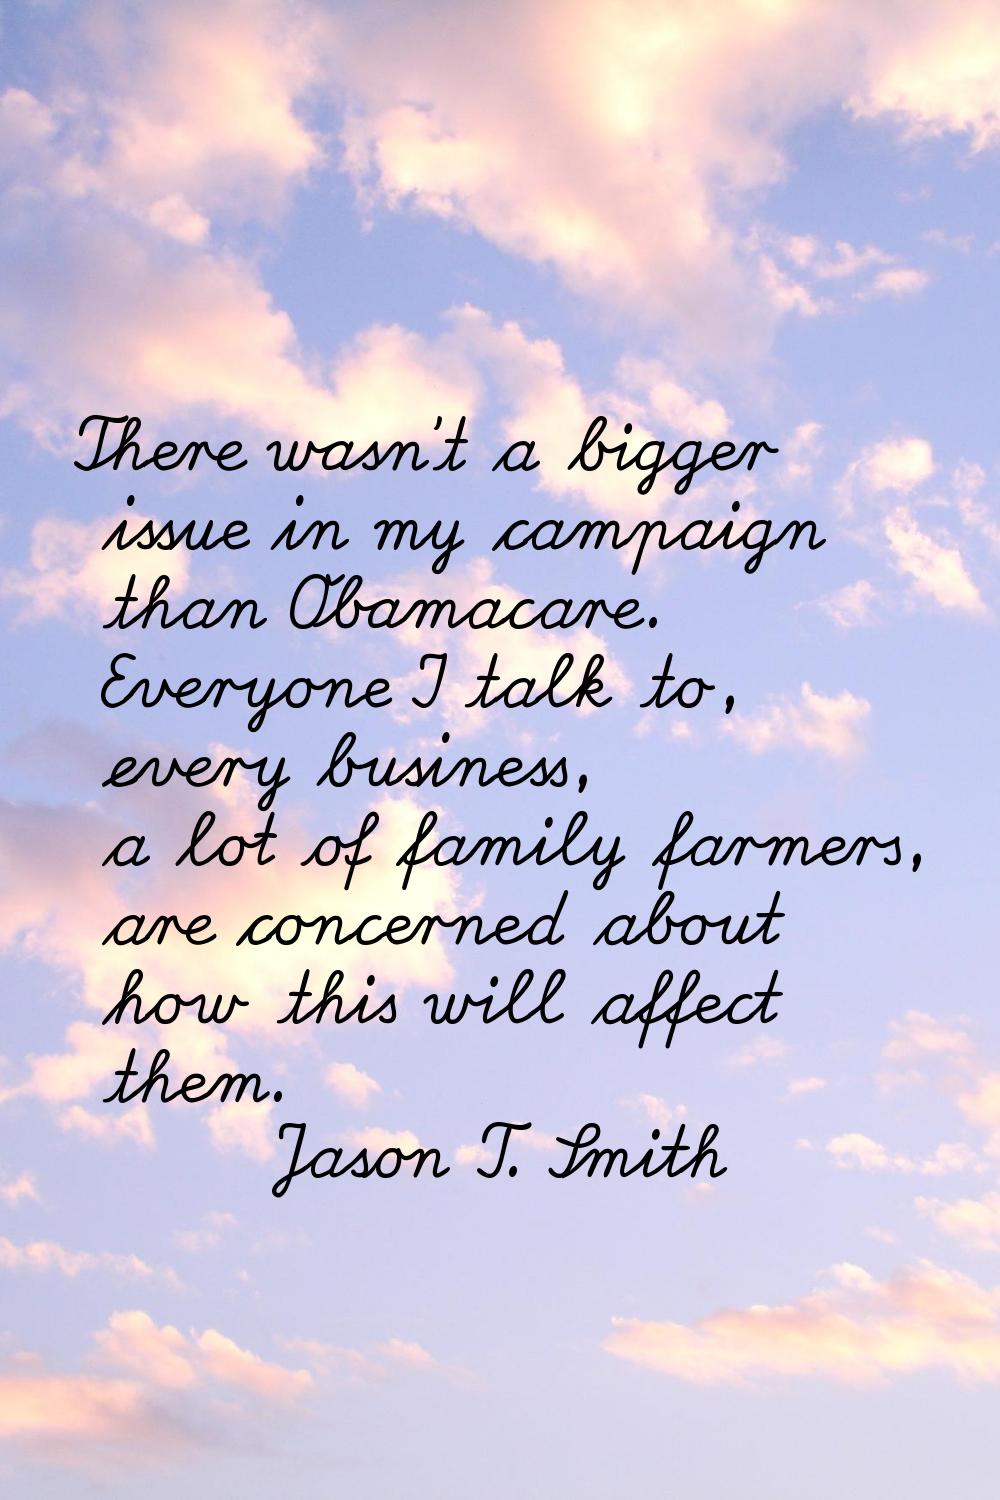 There wasn't a bigger issue in my campaign than Obamacare. Everyone I talk to, every business, a lo